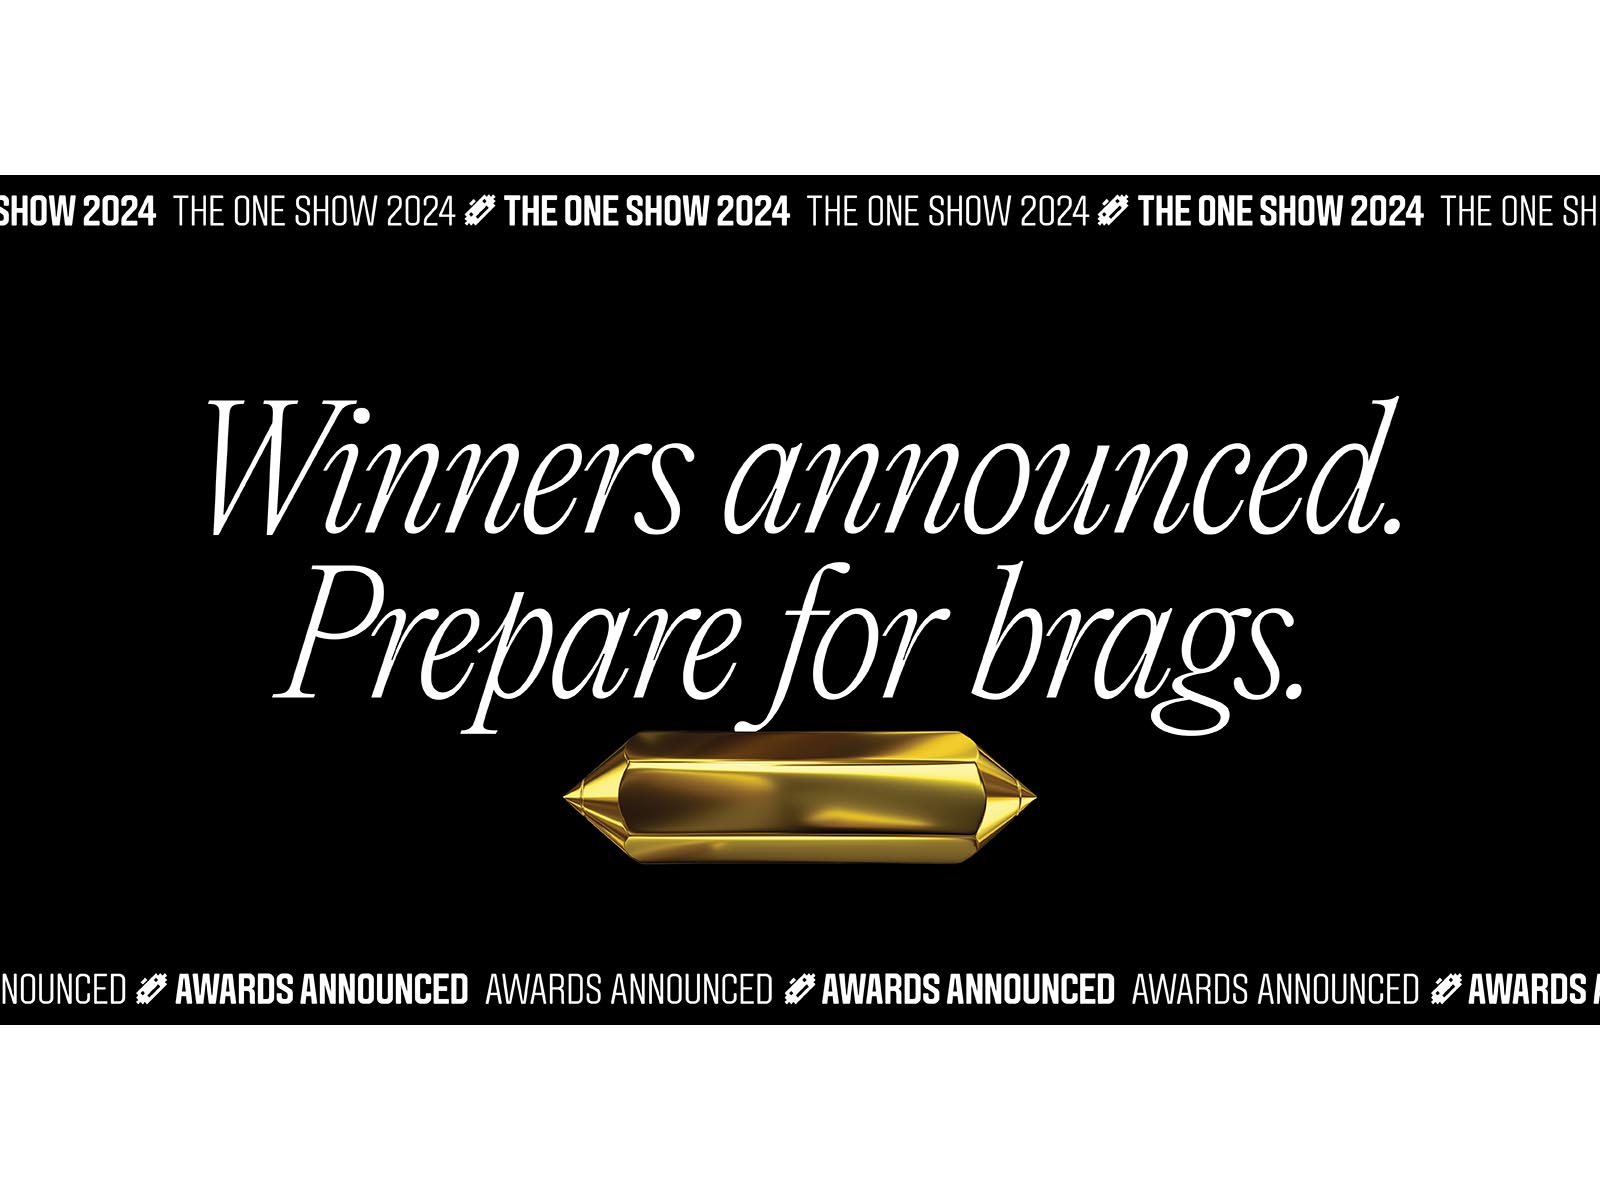 Nine Pencil wins from MEA In The One Show 2024, including Leo Burnett KSA and Impact BBDO